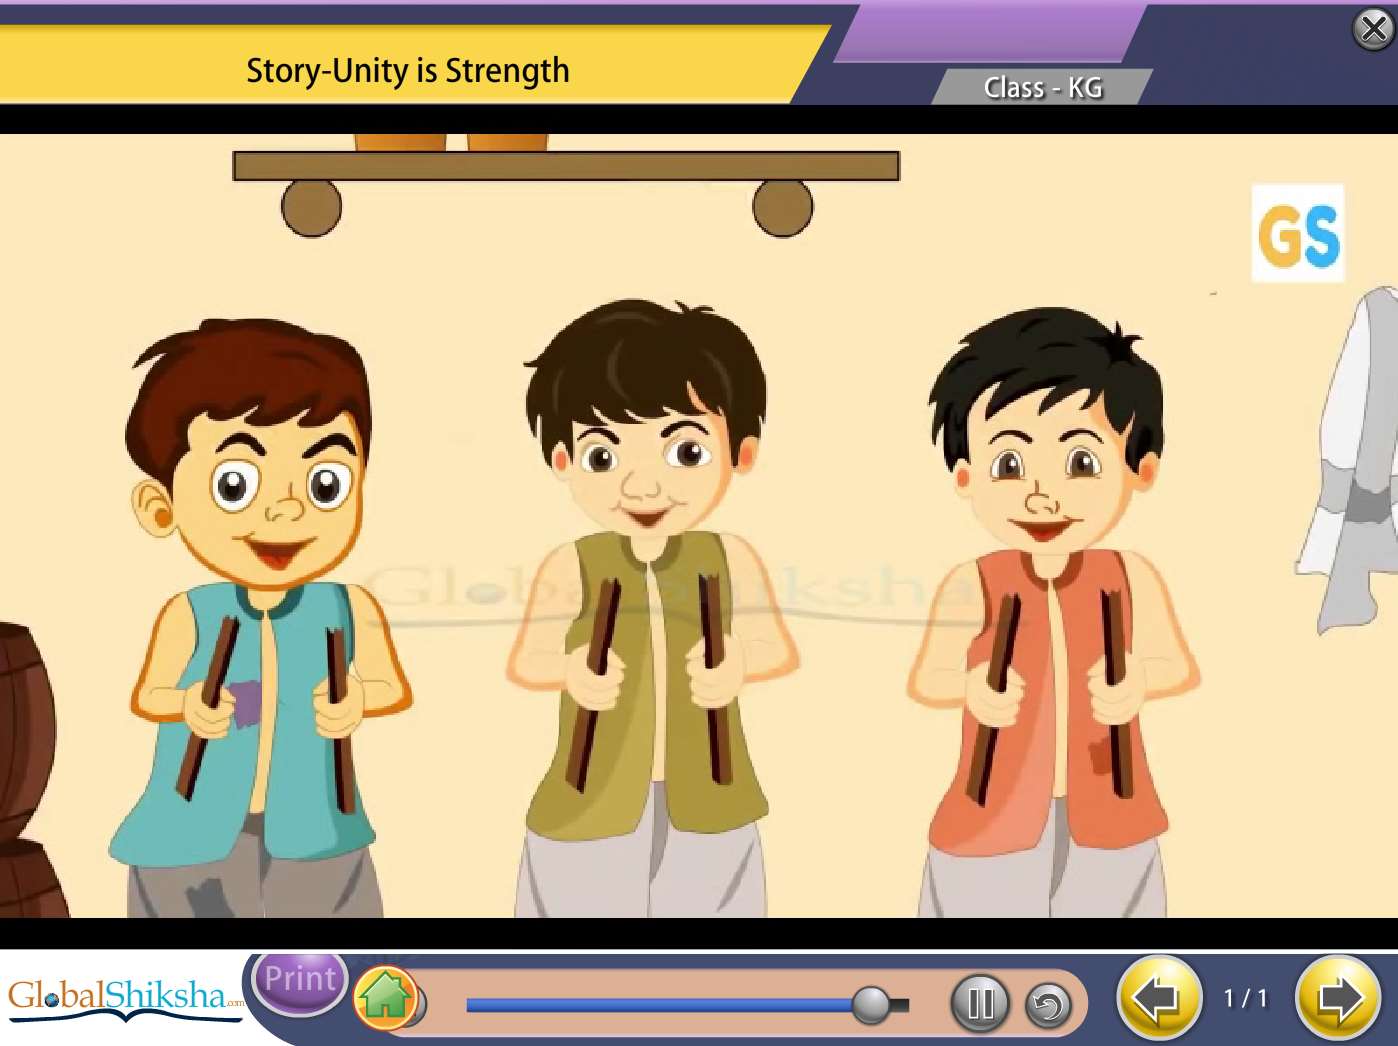 CBSE KG General knowledge, Stories & Rhymes Animated Pendrive in English